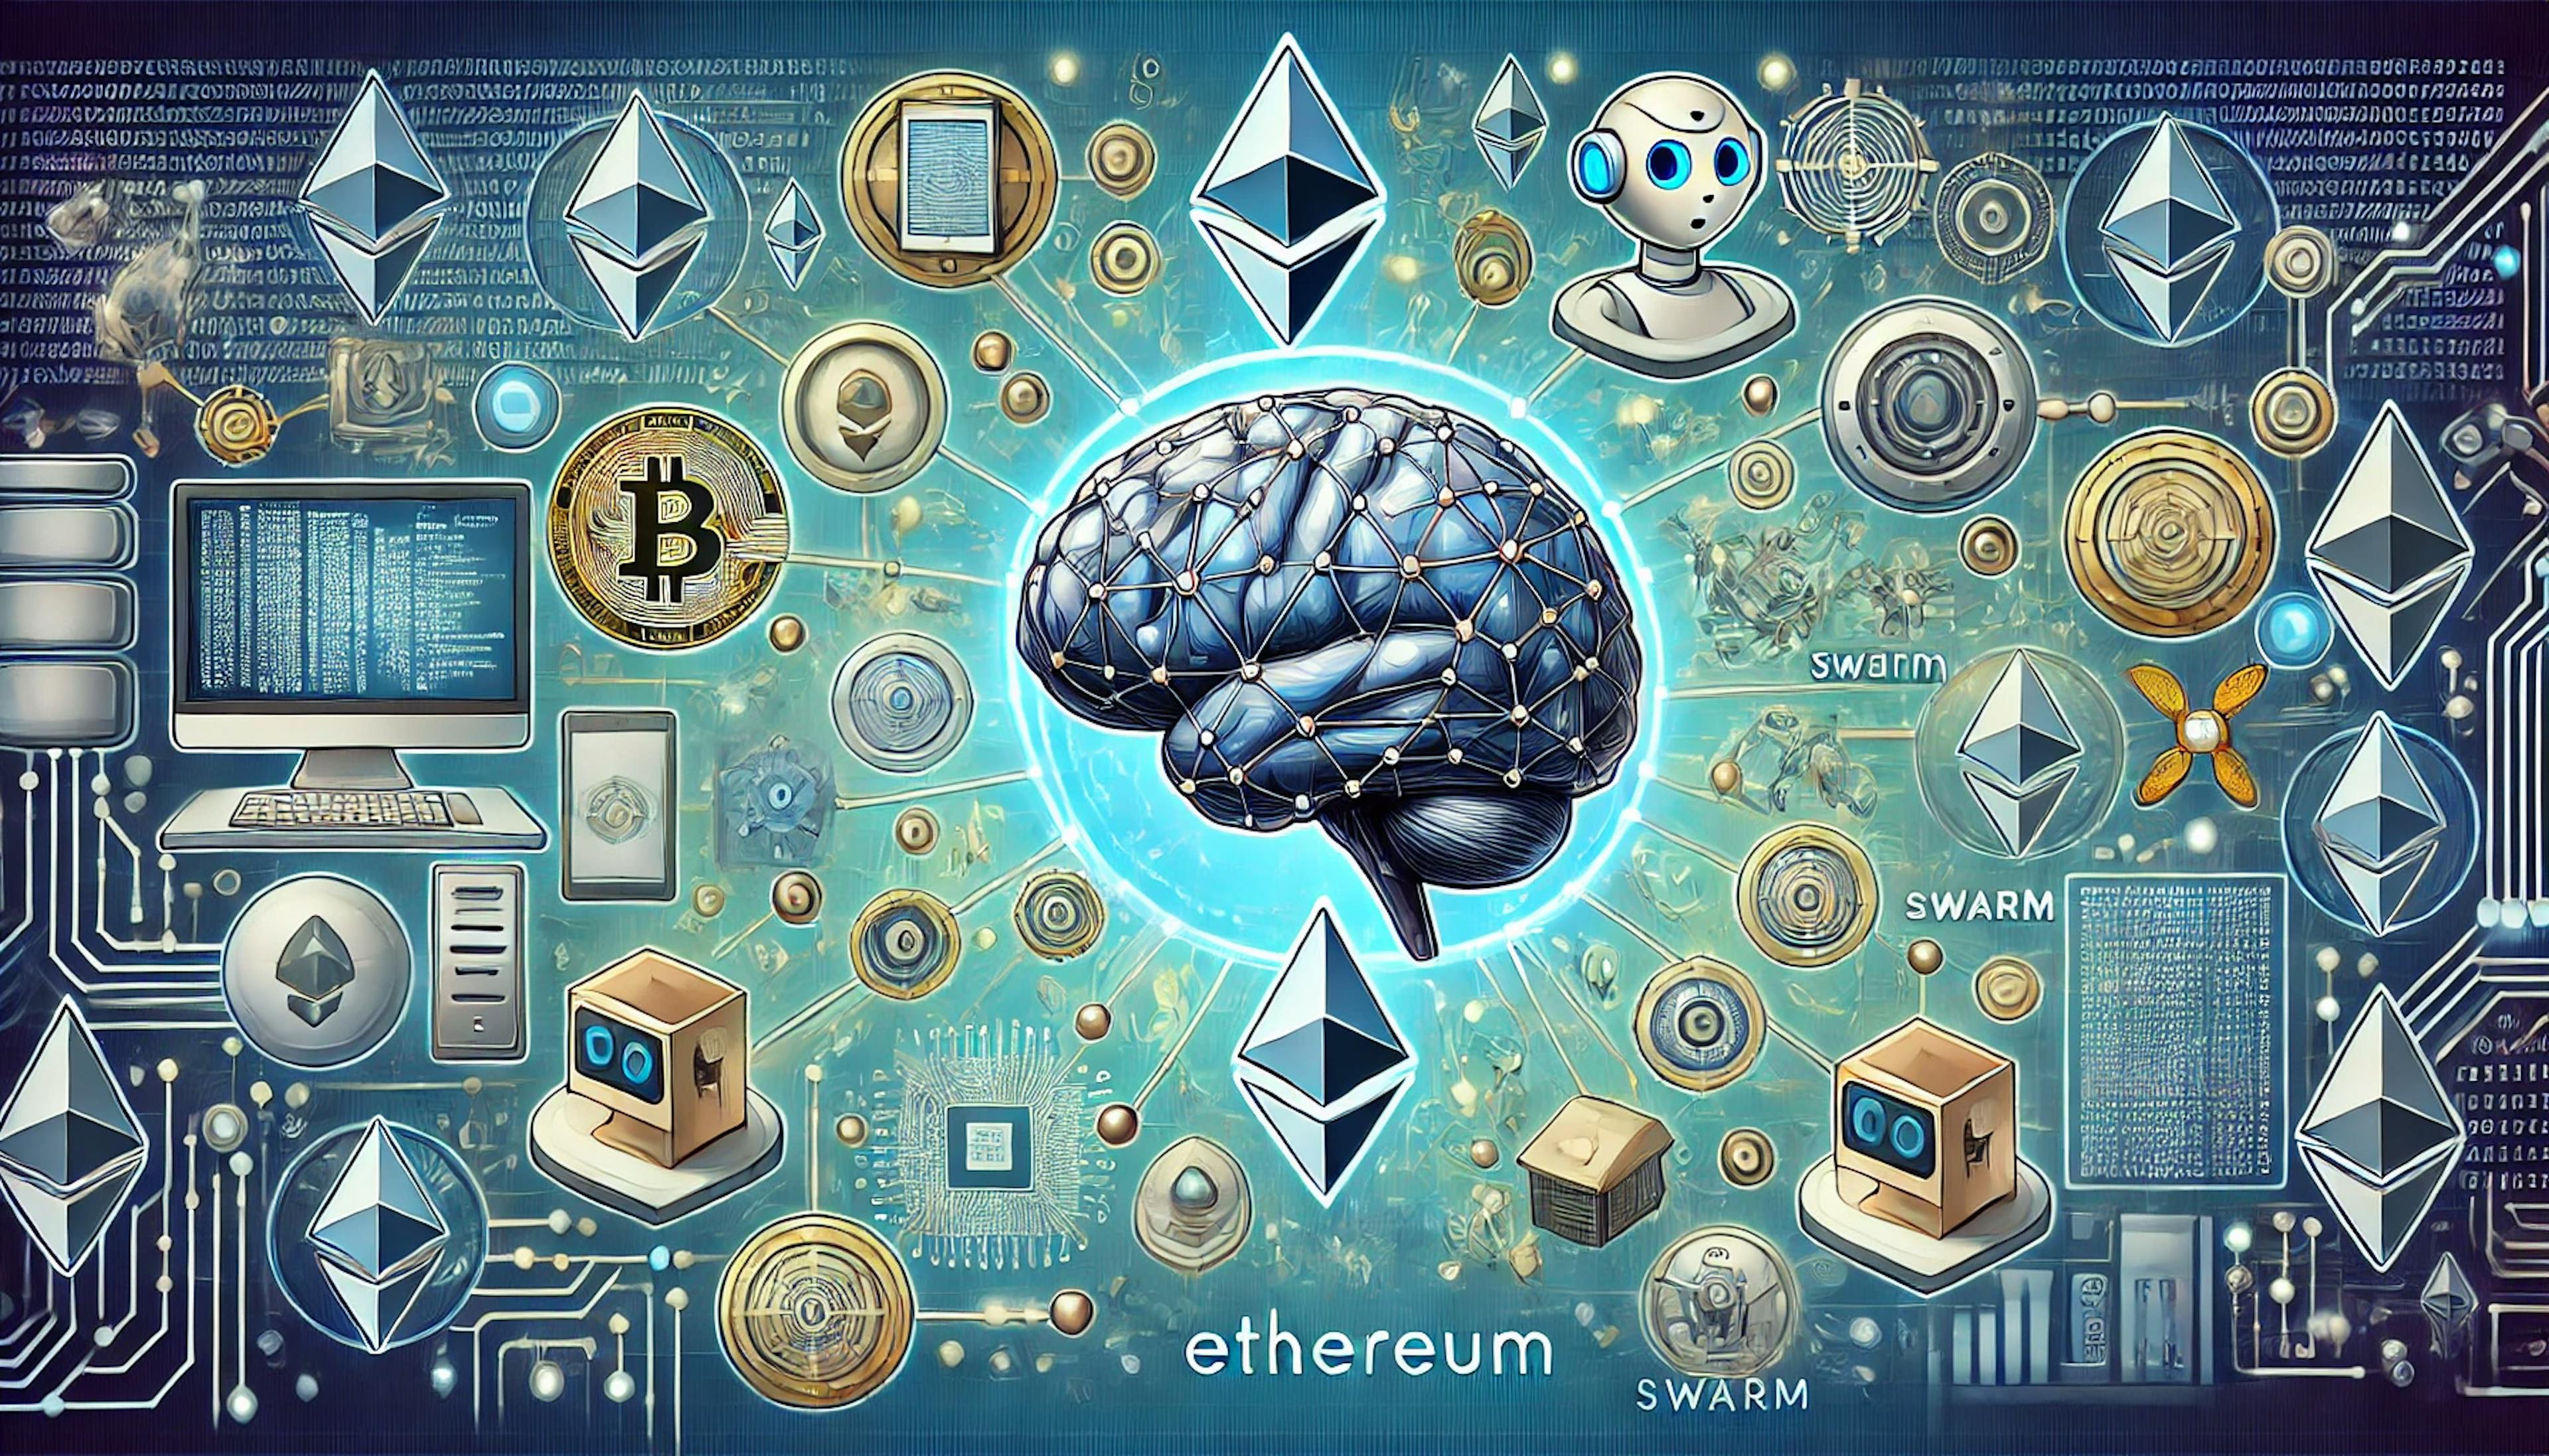 featured image - A Concept of Collective aI on Ethereum and Ethereum Swarm